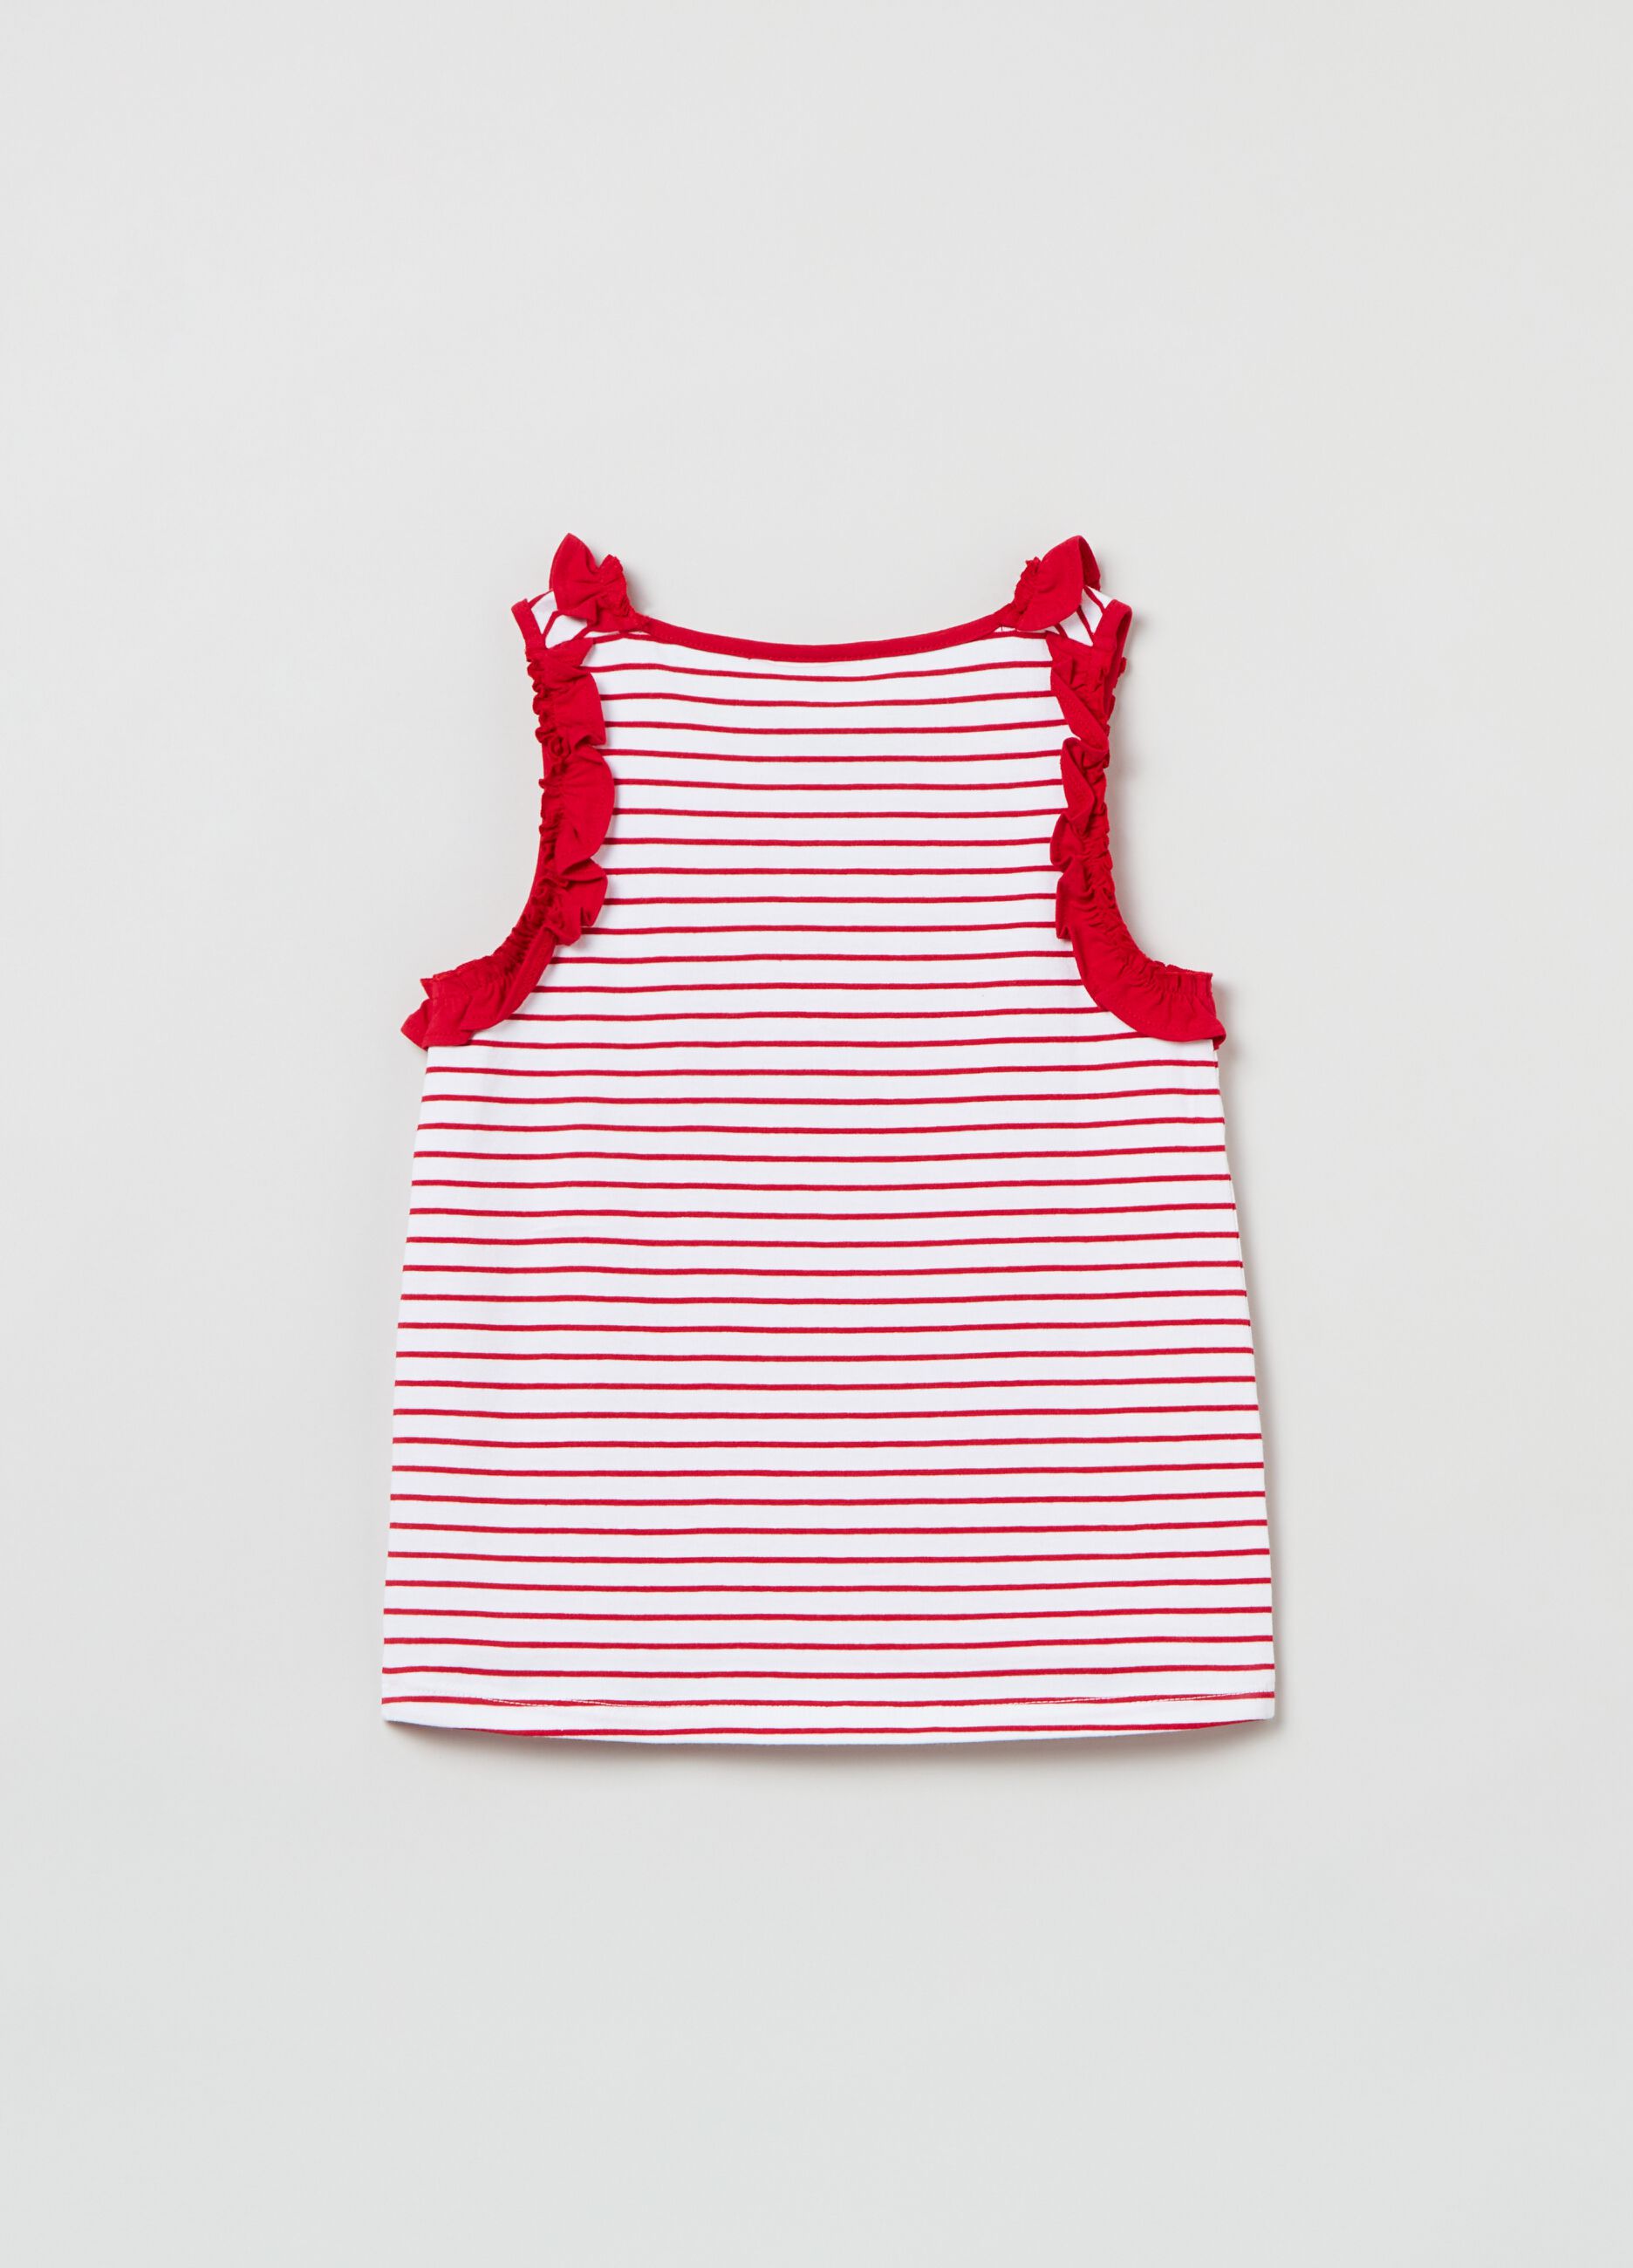 Striped tank top with Hello Kitty print